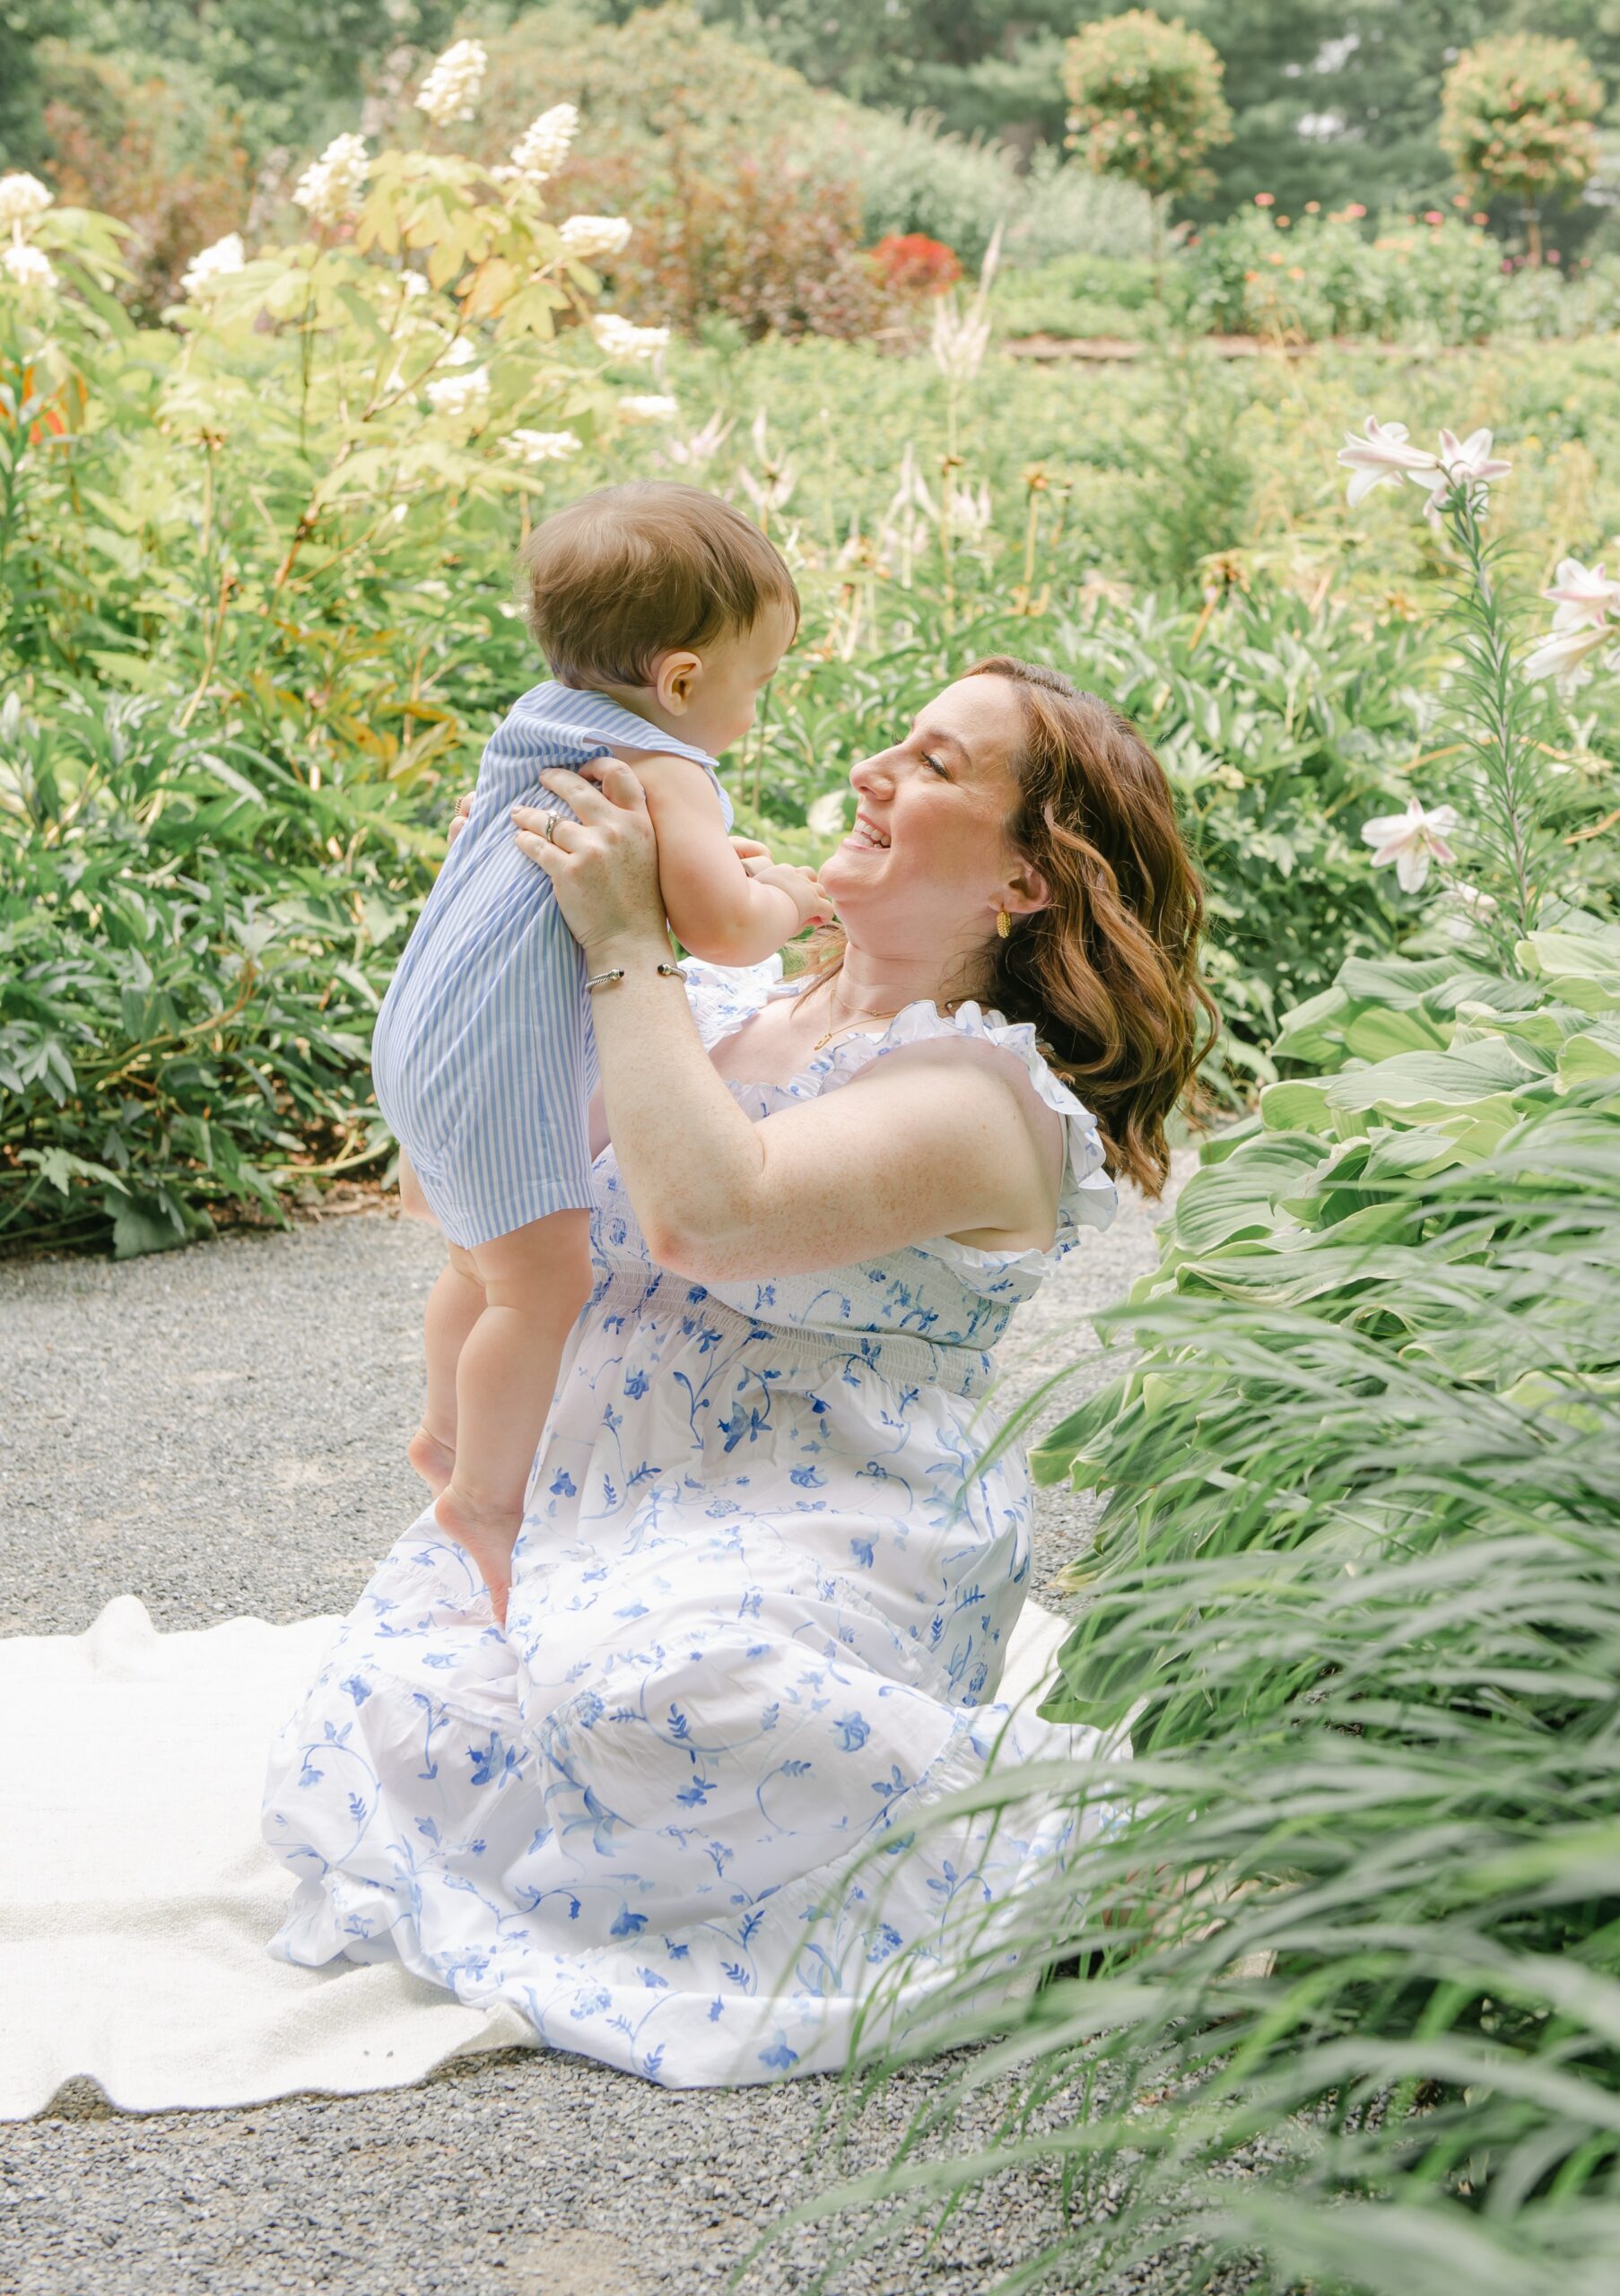 A mother in a white dress sits on a picnic blanket in a flower garden playing and lifting her infant son in a blue striped onesie downington preschools